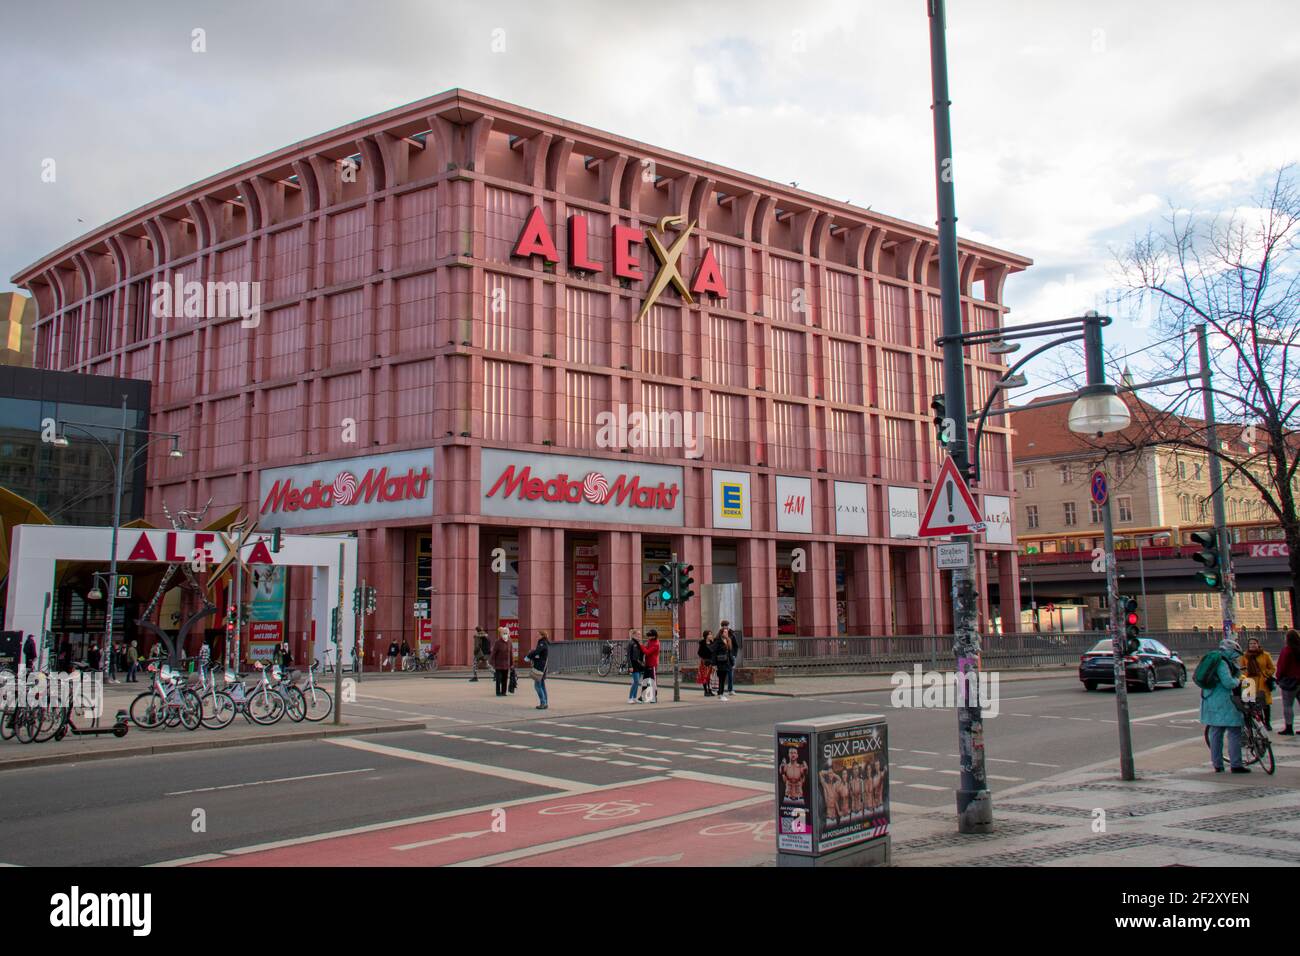 Page 2 - Alexa Shopping Centre Berlin Germany High Resolution Stock  Photography and Images - Alamy